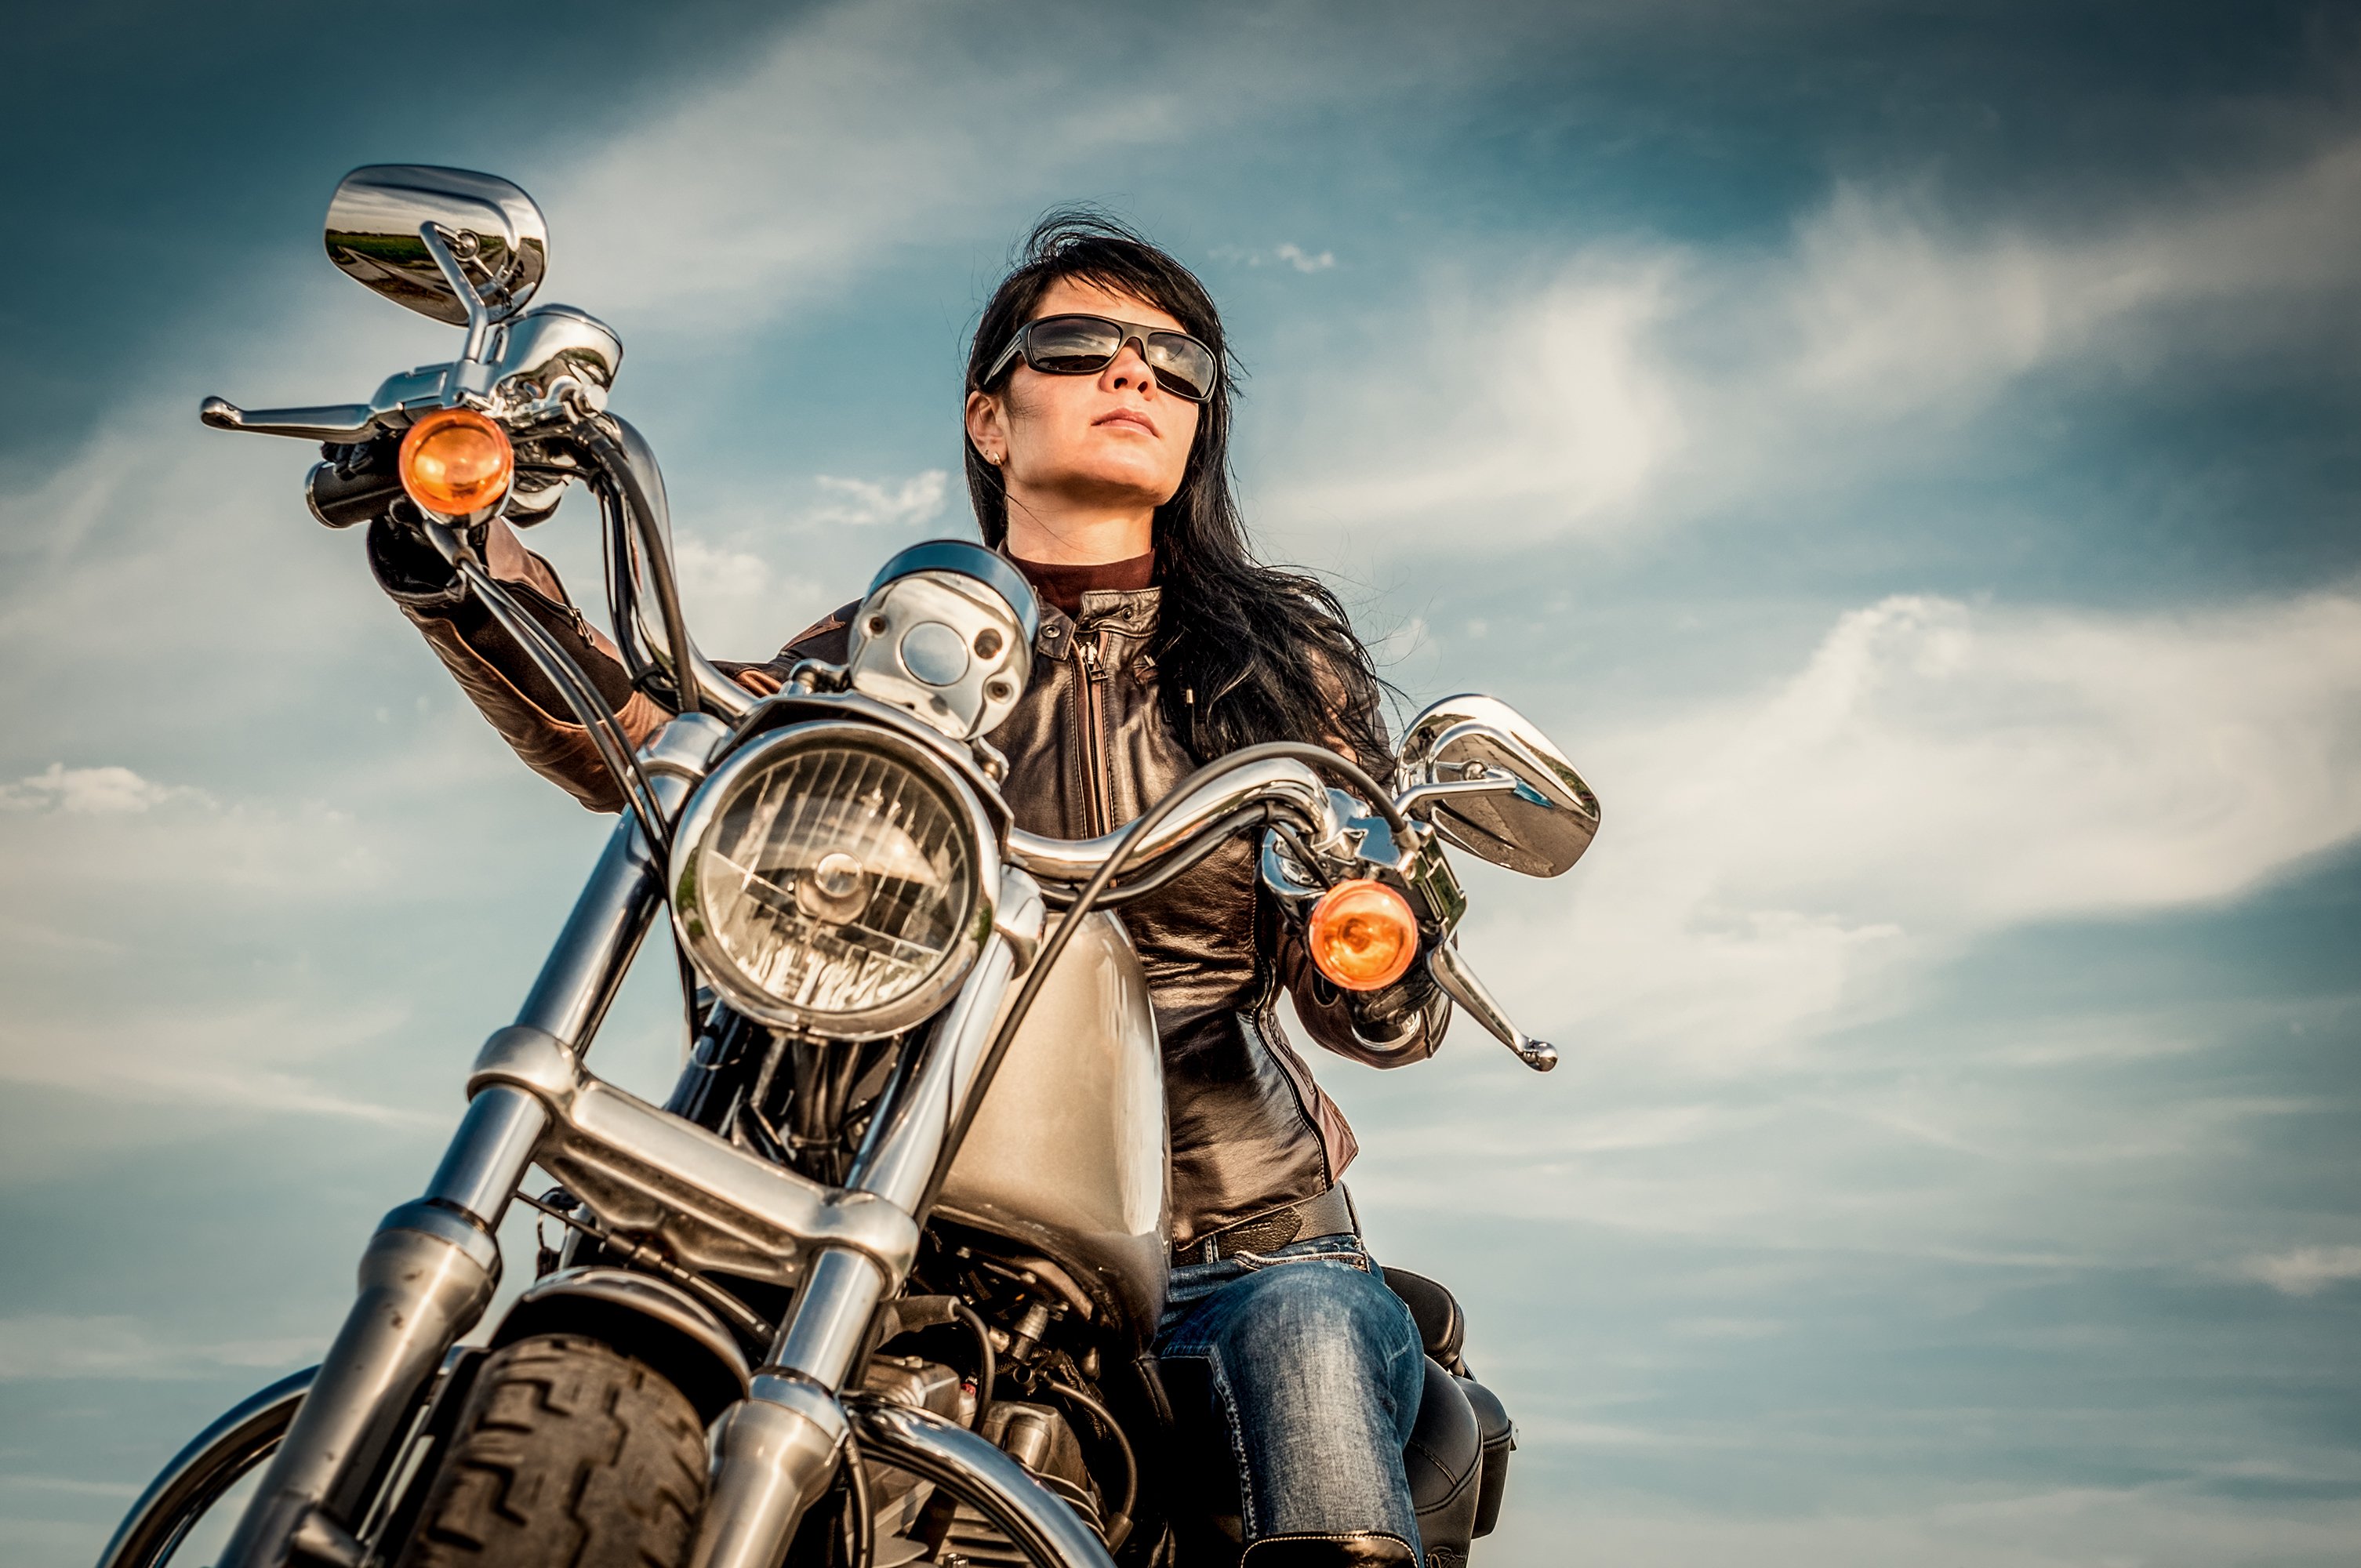 Woman on a motorcycle. Image credit: Shutterstock